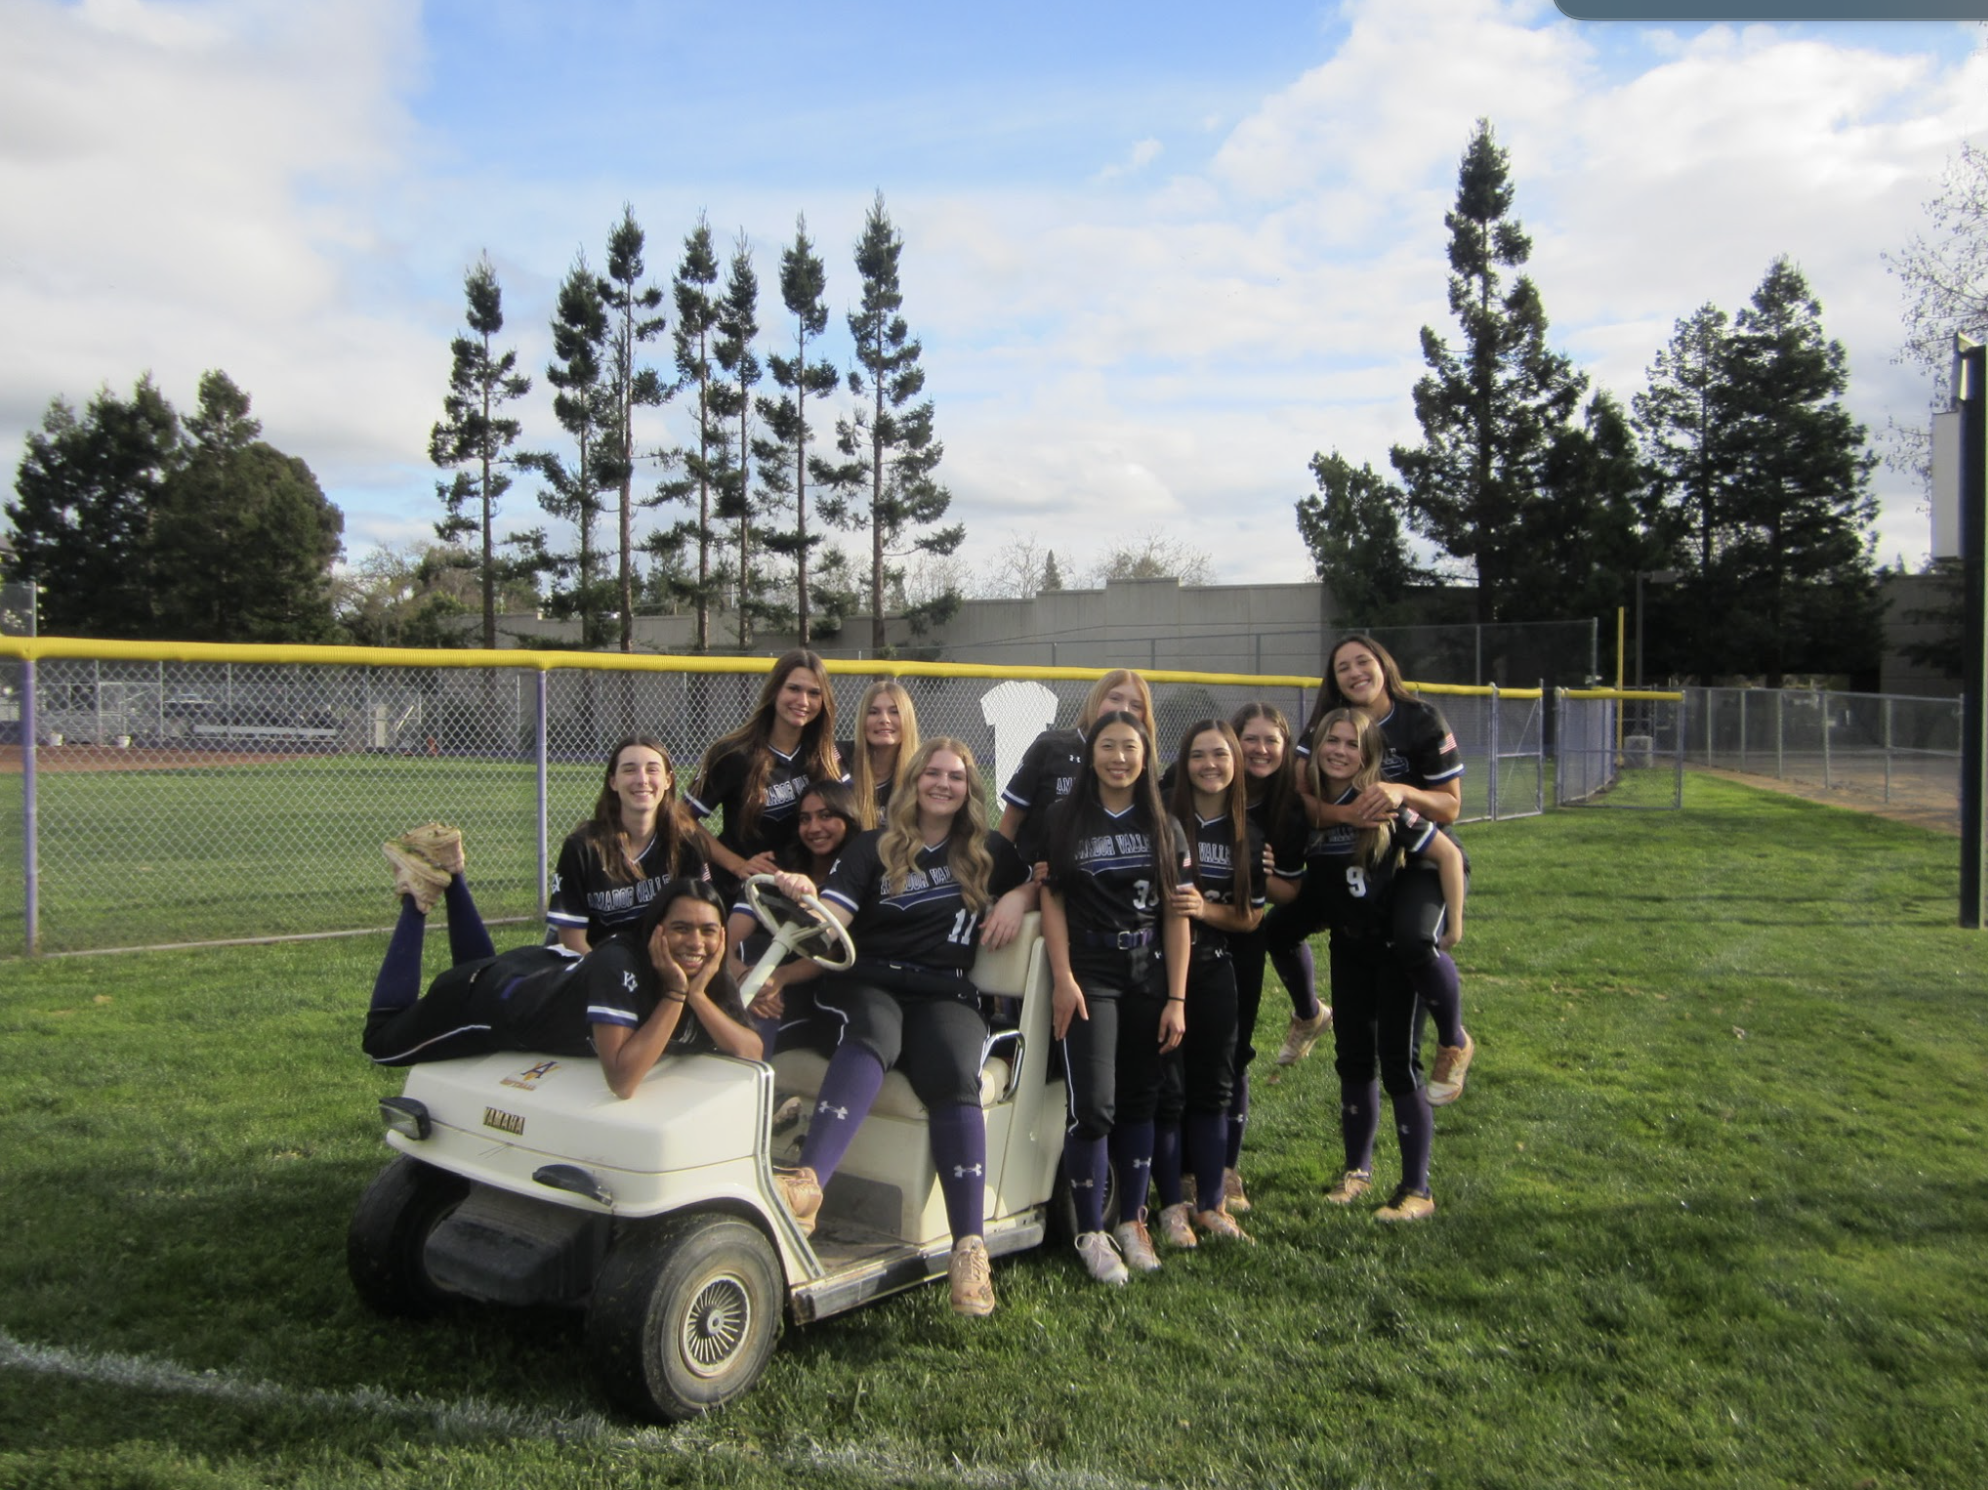 Amador Valley High School Softball Team’s Legacy: How Tradition & Mascots Drive Success